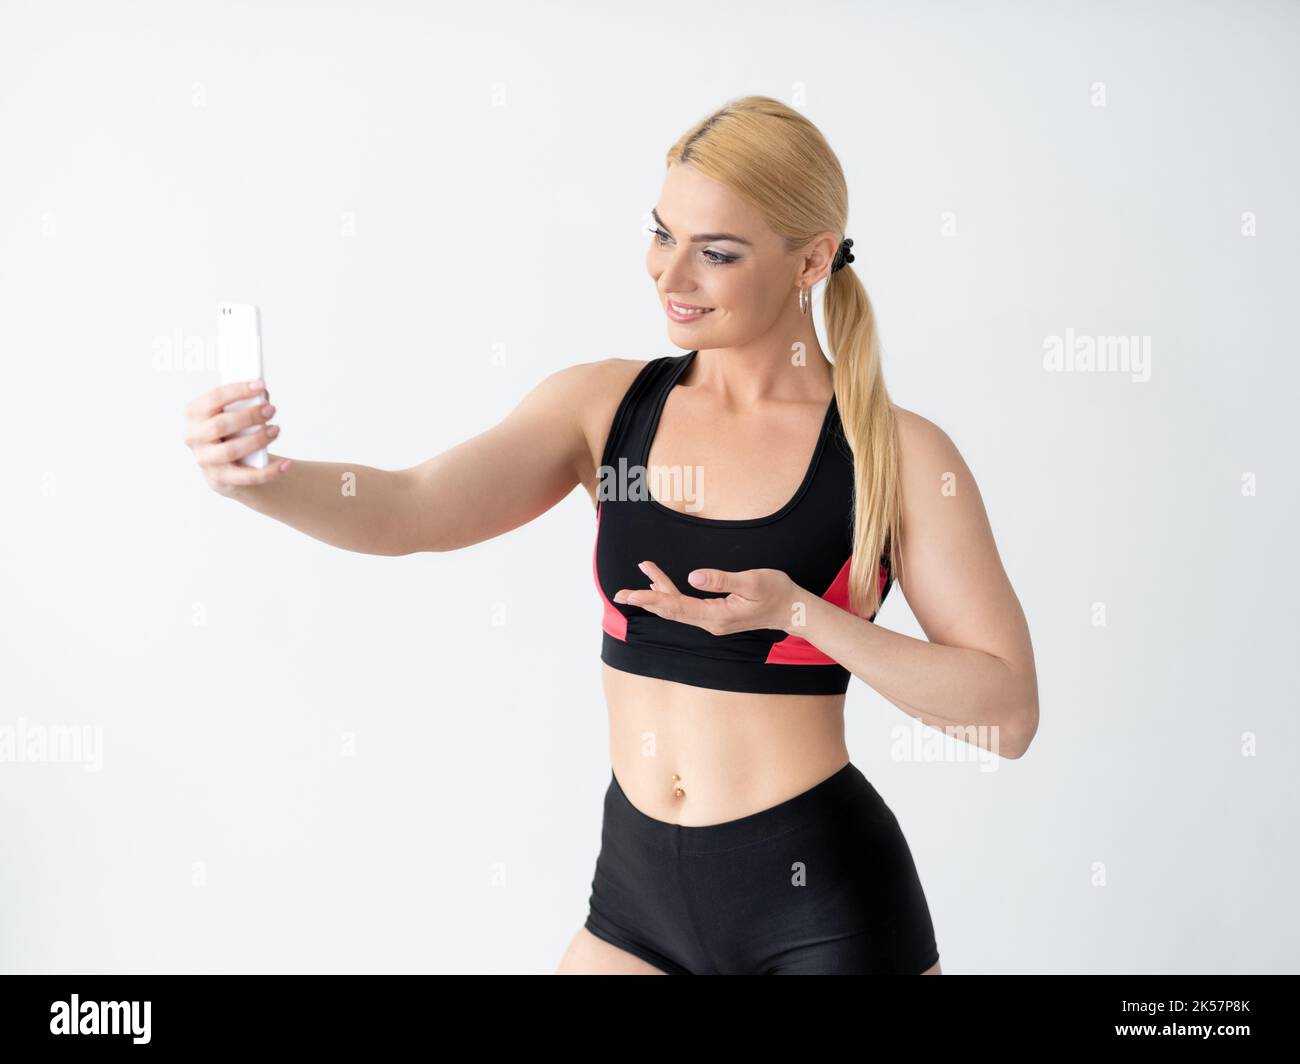 athletic woman promoting hand sport influence Stock Photo